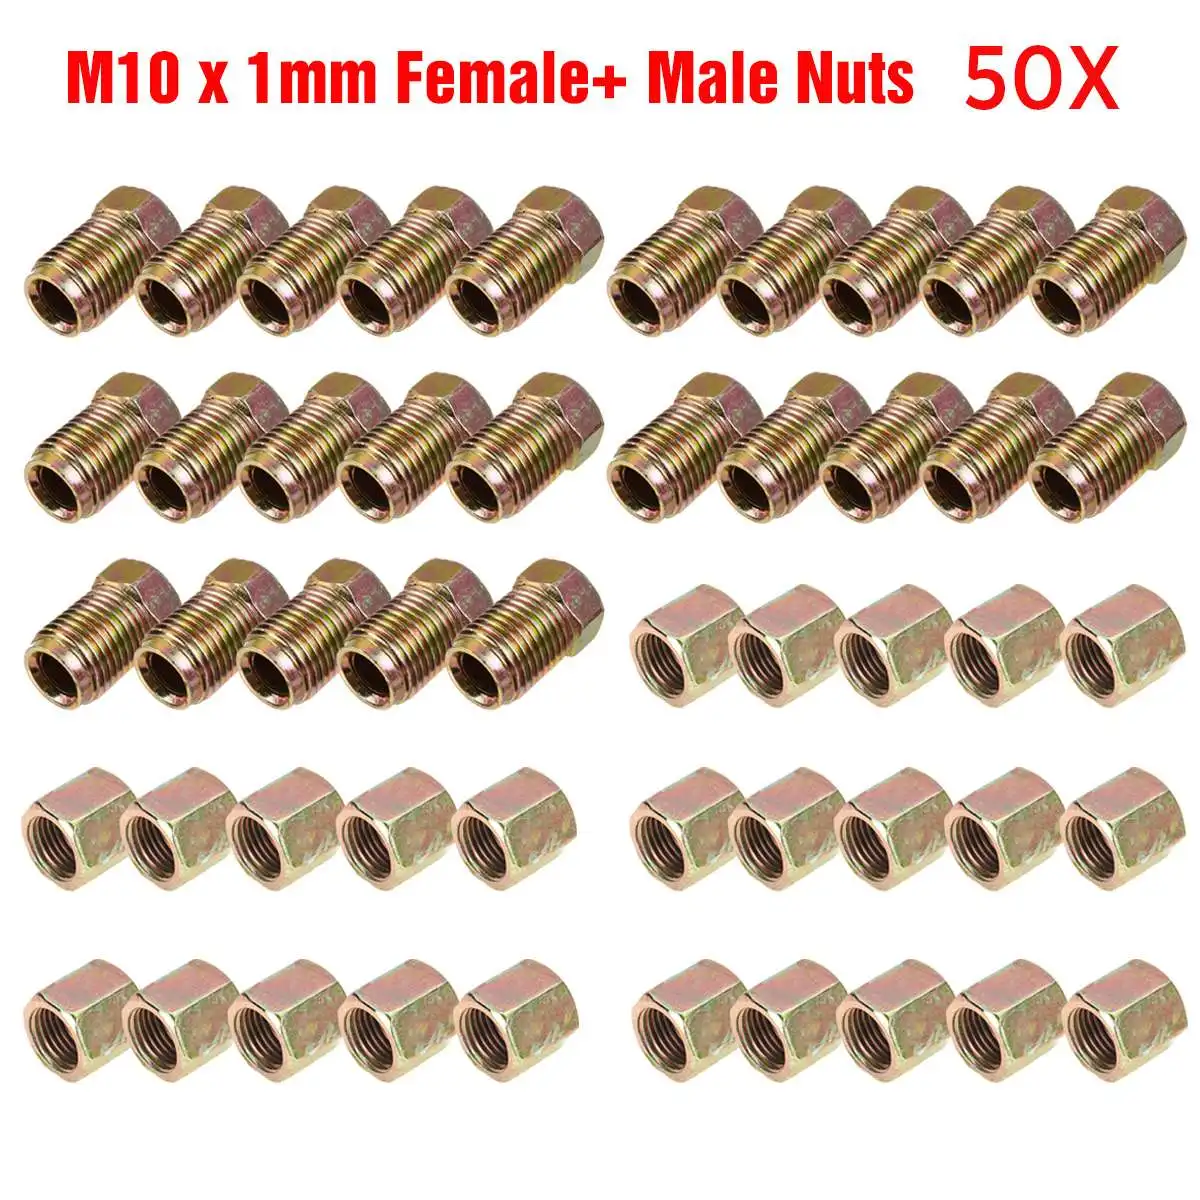 Brake Pipe Connectors 10mm x 1mm 2 Way Inline Male and Female Nuts For 3/16 Pipe